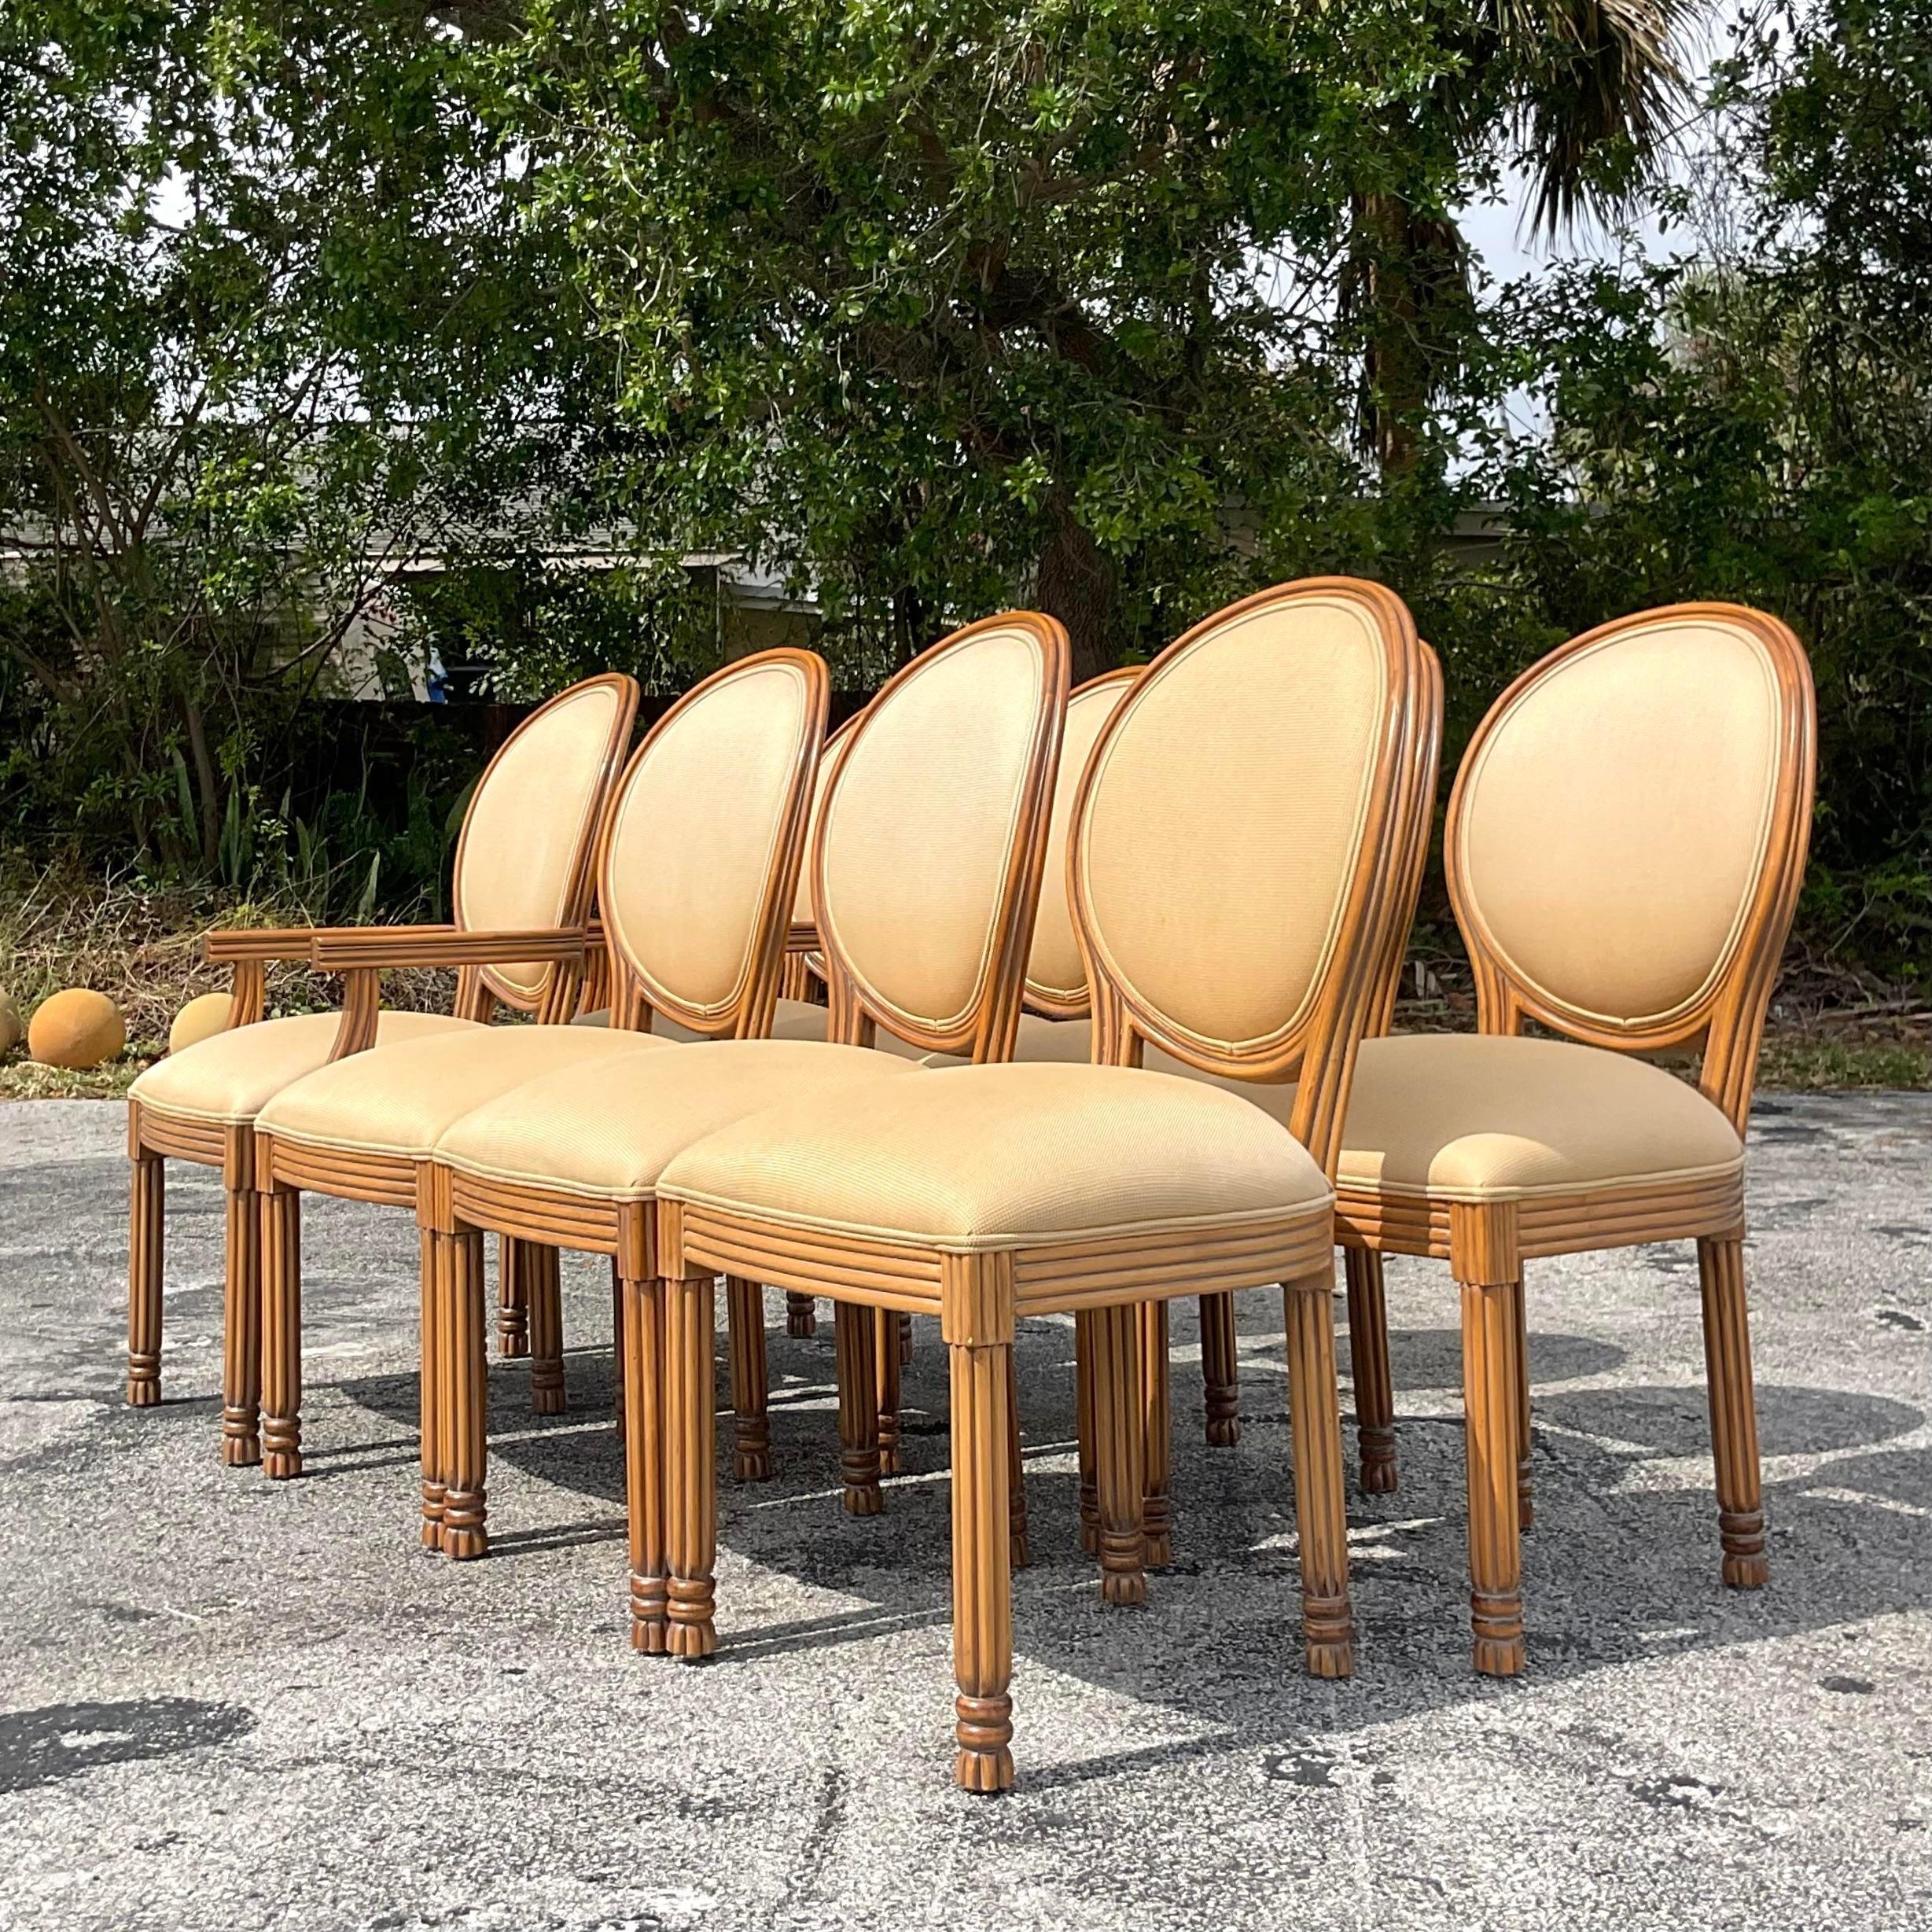 A fabulous set of 8 vintage Boho dining chairs. Made by the iconic Kreiss Collection and tagged below the seat. Beautiful hand carved detail with a medallion back shape. Acquired from a Palm Beach estate.

Side chairs 21.5 